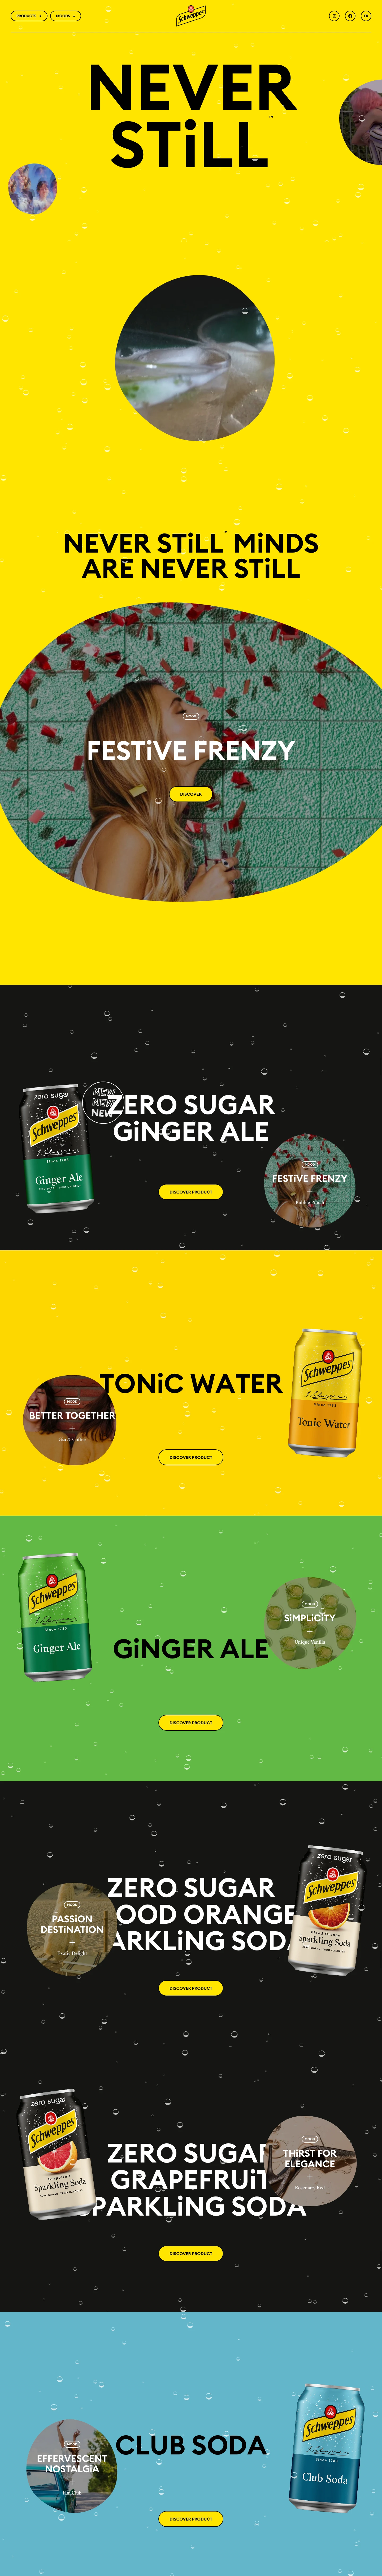 Schweppes Landing Page Example: With over 200 years of unique heritage, Schweppes has been offering quality taste, enjoyed in seemingly limitless ways around the world.